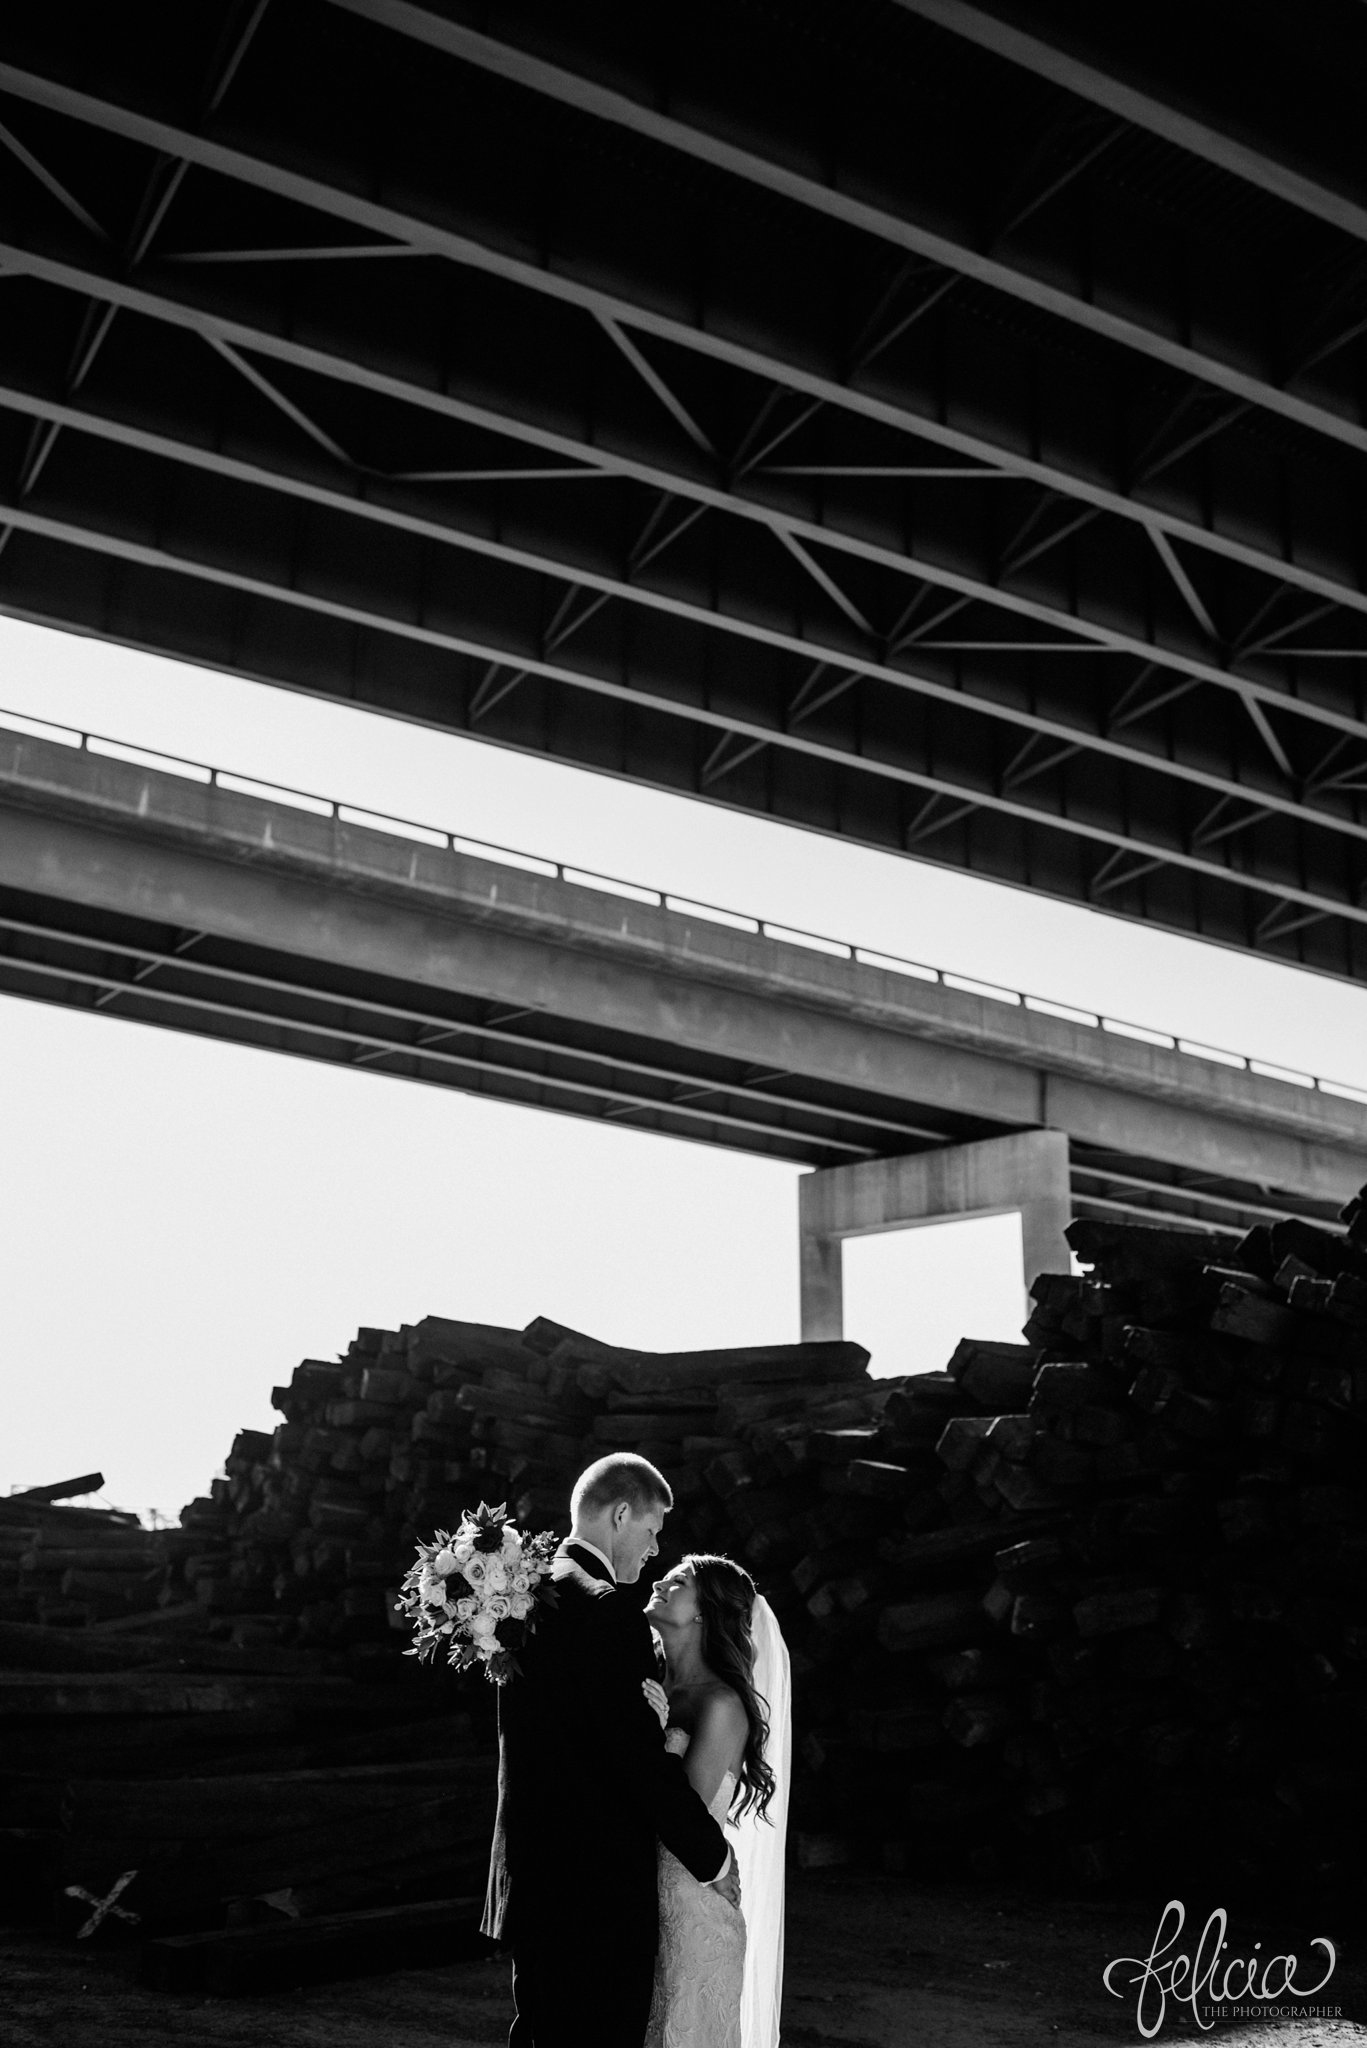 black and white | wedding | wedding photos | industrial | Rumely Event Space | wedding photography | images by feliciathephotographer.com | West Bottoms | industrial background | bride and groom portraits | forehead kiss | romantic pose | dramatic | highway overpass 